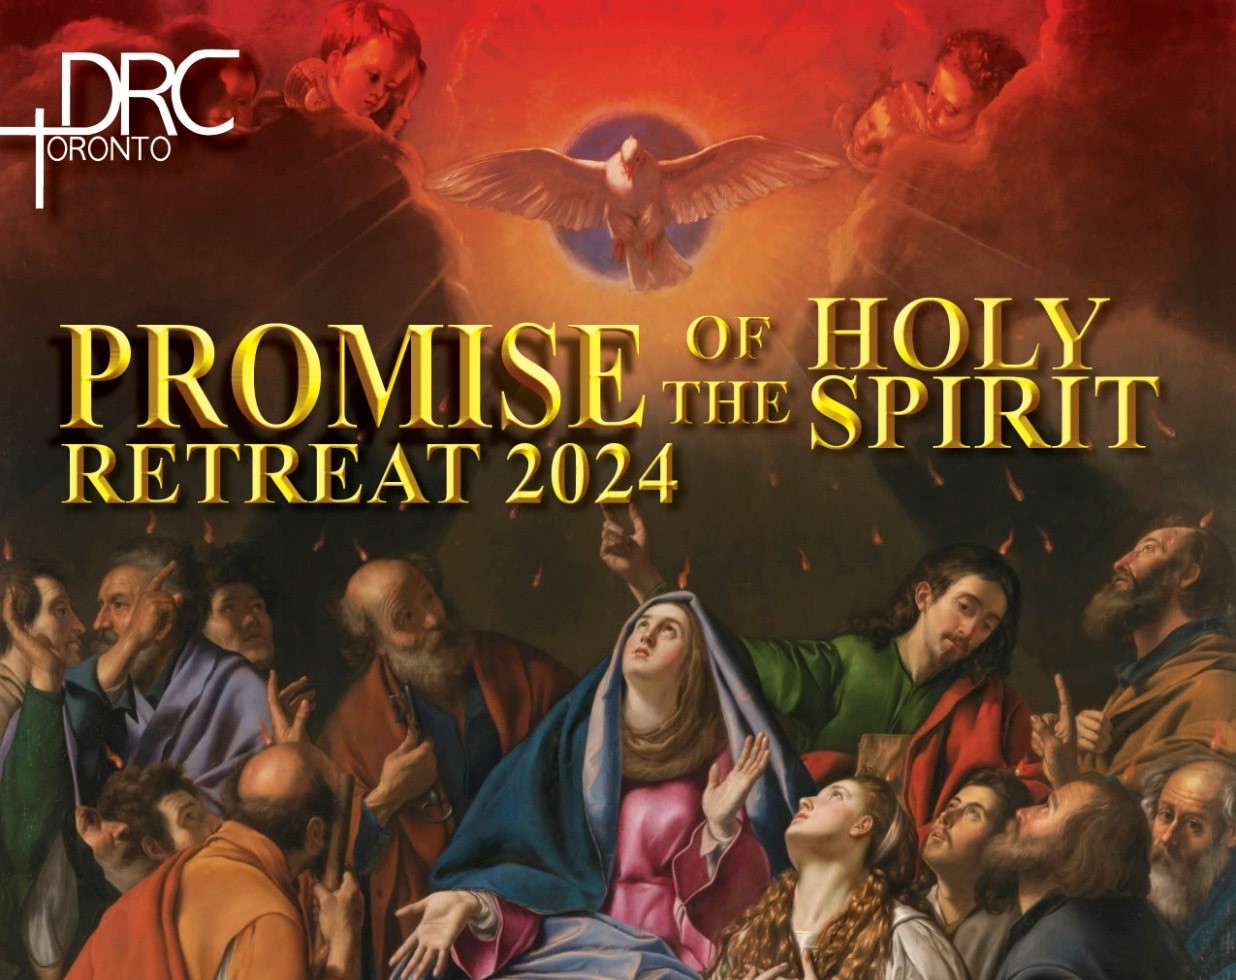 Promise of the Holy Spirit Retreat 2024 Poster